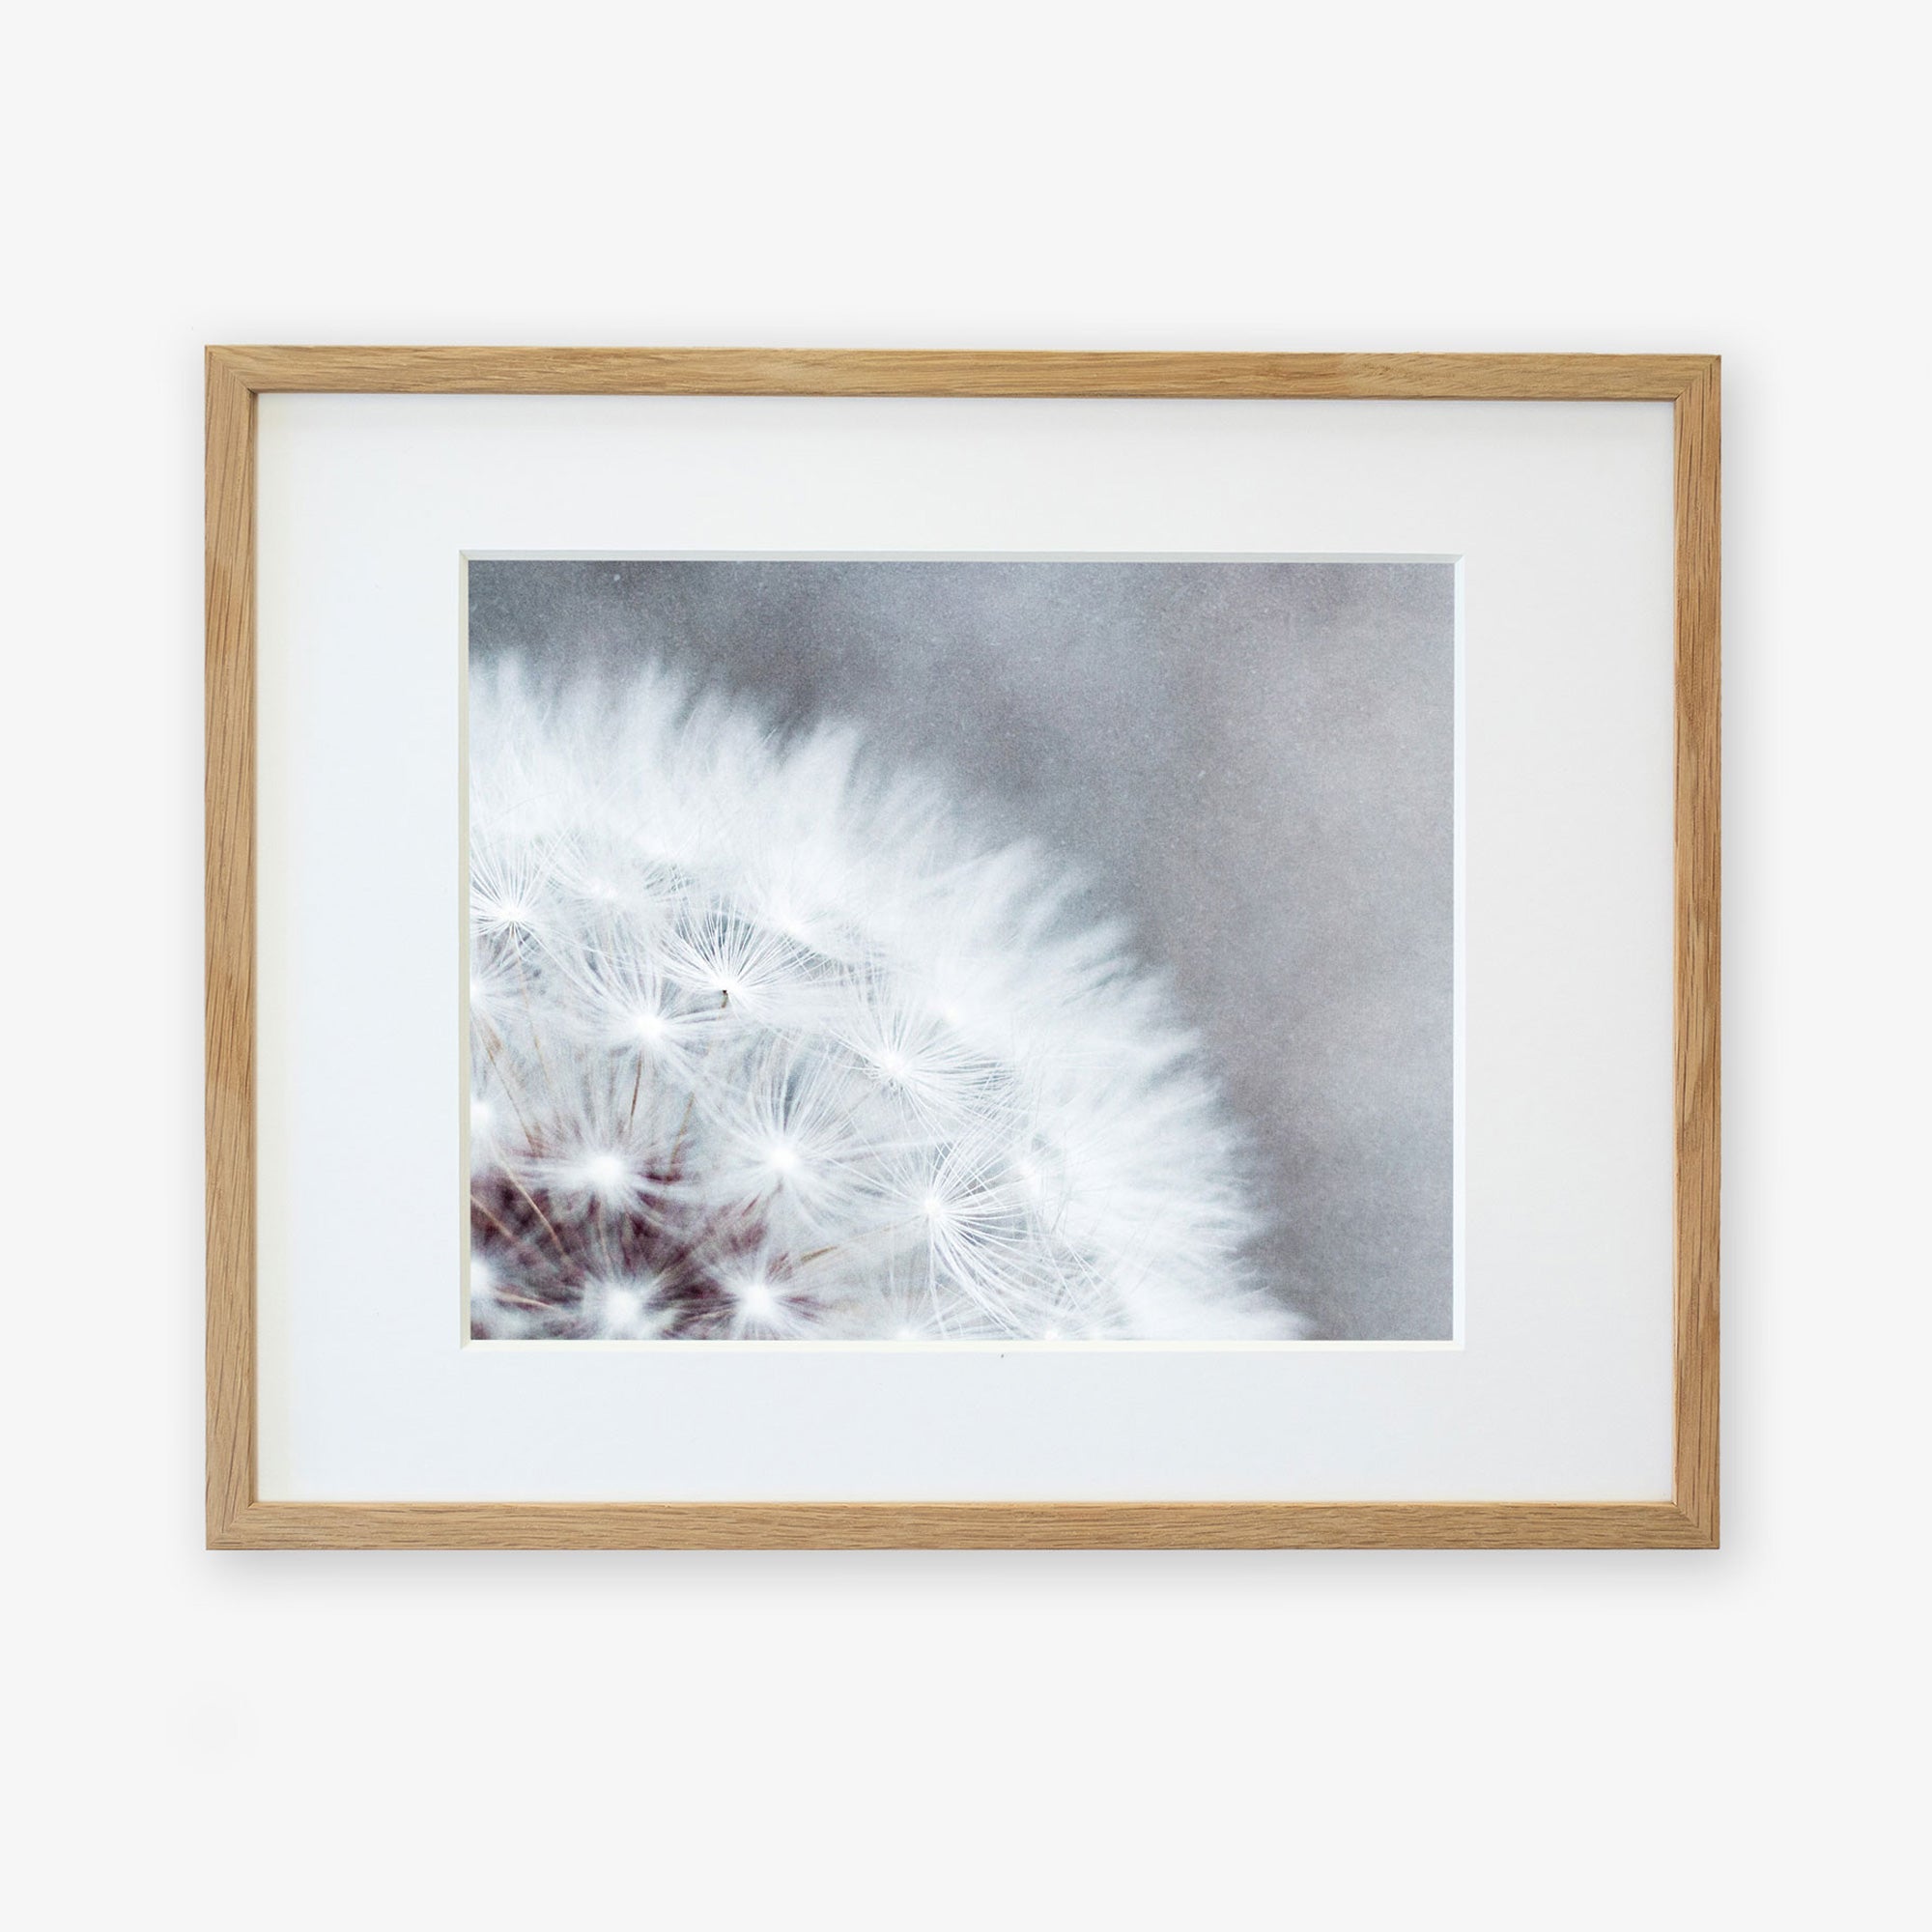 A framed Grey Botanical Print, &#39;Dandelion Queen&#39; by Offley Green, displaying delicate white fluff and seeds of a dandelion tuft, mounted on a wall with a light wooden frame and white matte border.